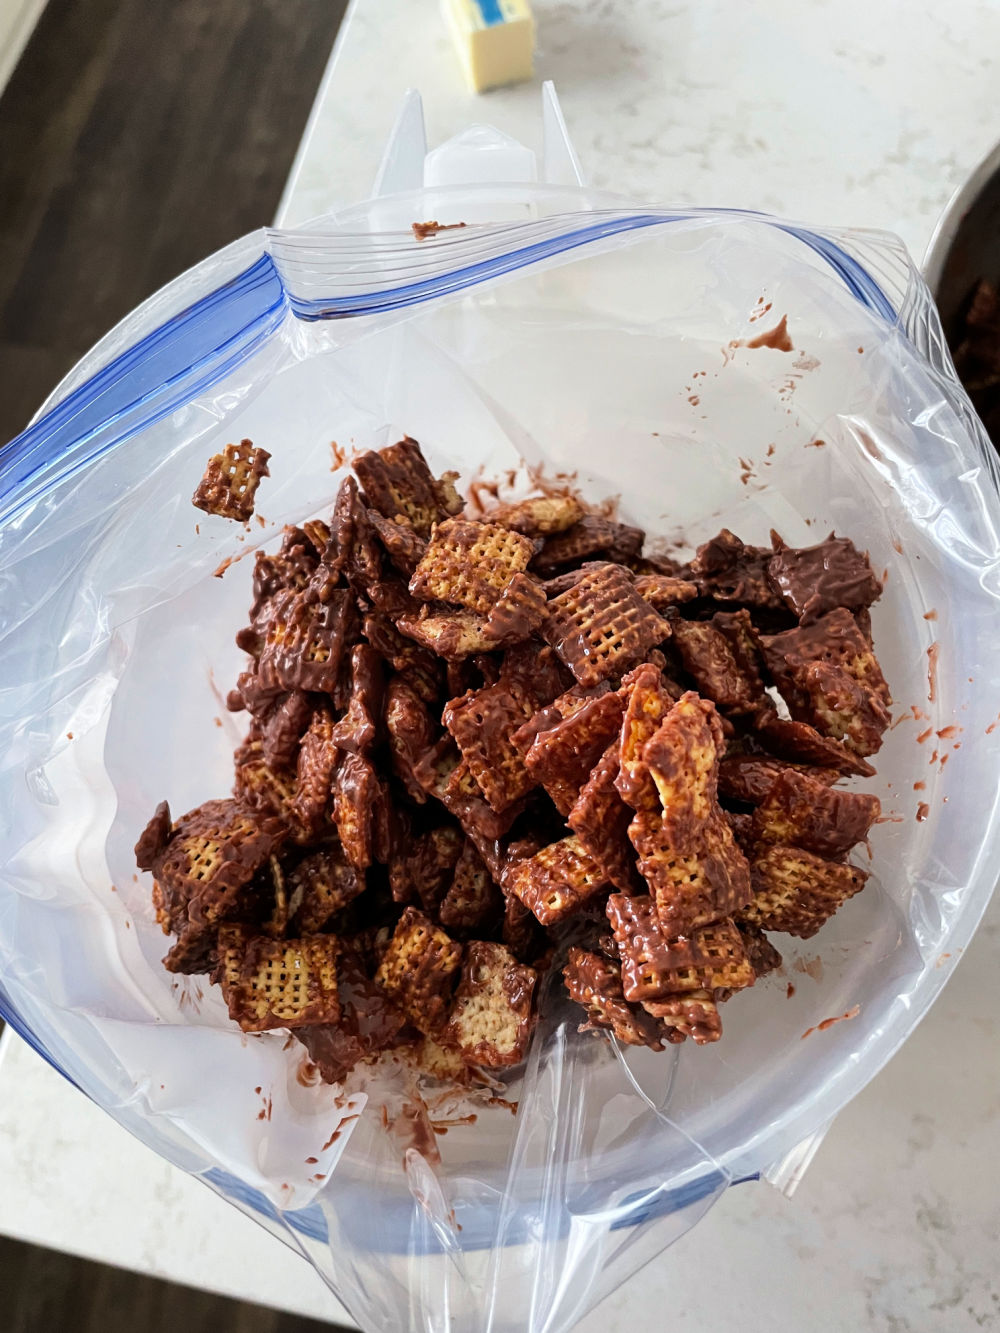 cereal coated with chocolate in a plastic bag